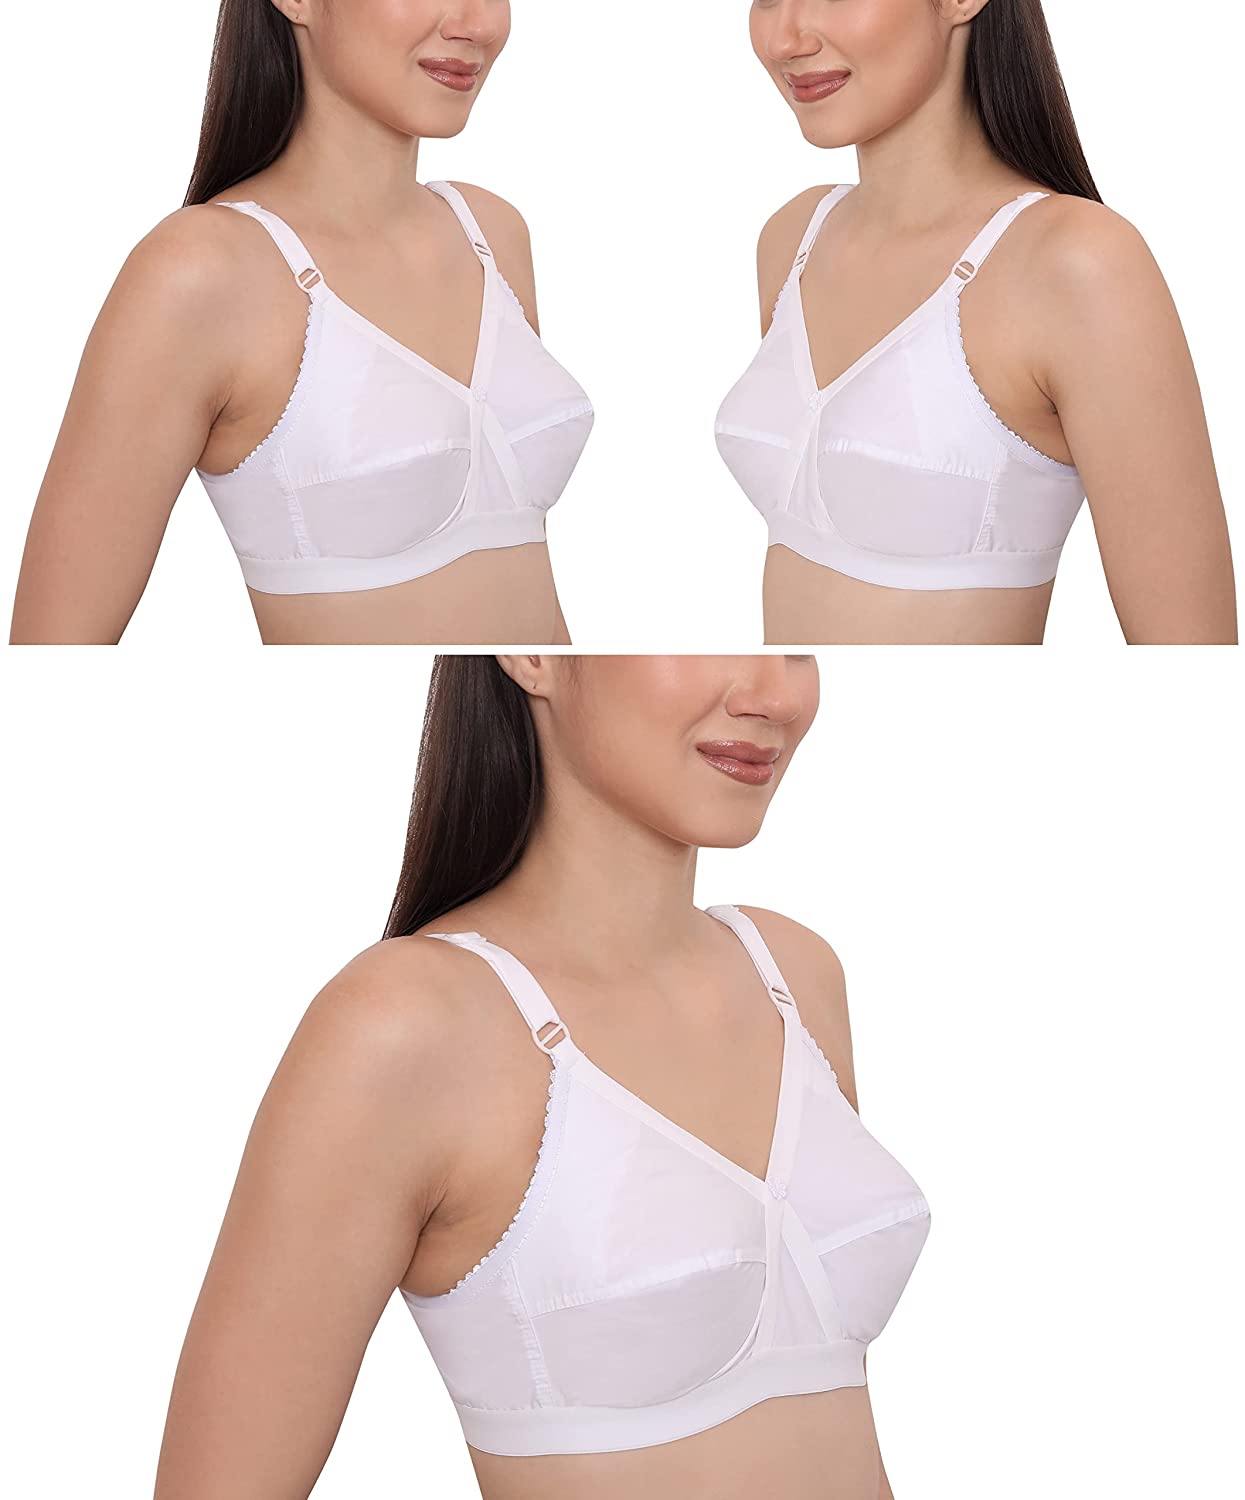 Buy Caracal Cotton Bra Full Cup Non Padded/Non Wired White Round Stitch  Daily Use/Everyday Bra for Women/Girls Full Coverage B & C Cups Lingerie  Innerwear Size 28B One pcs at